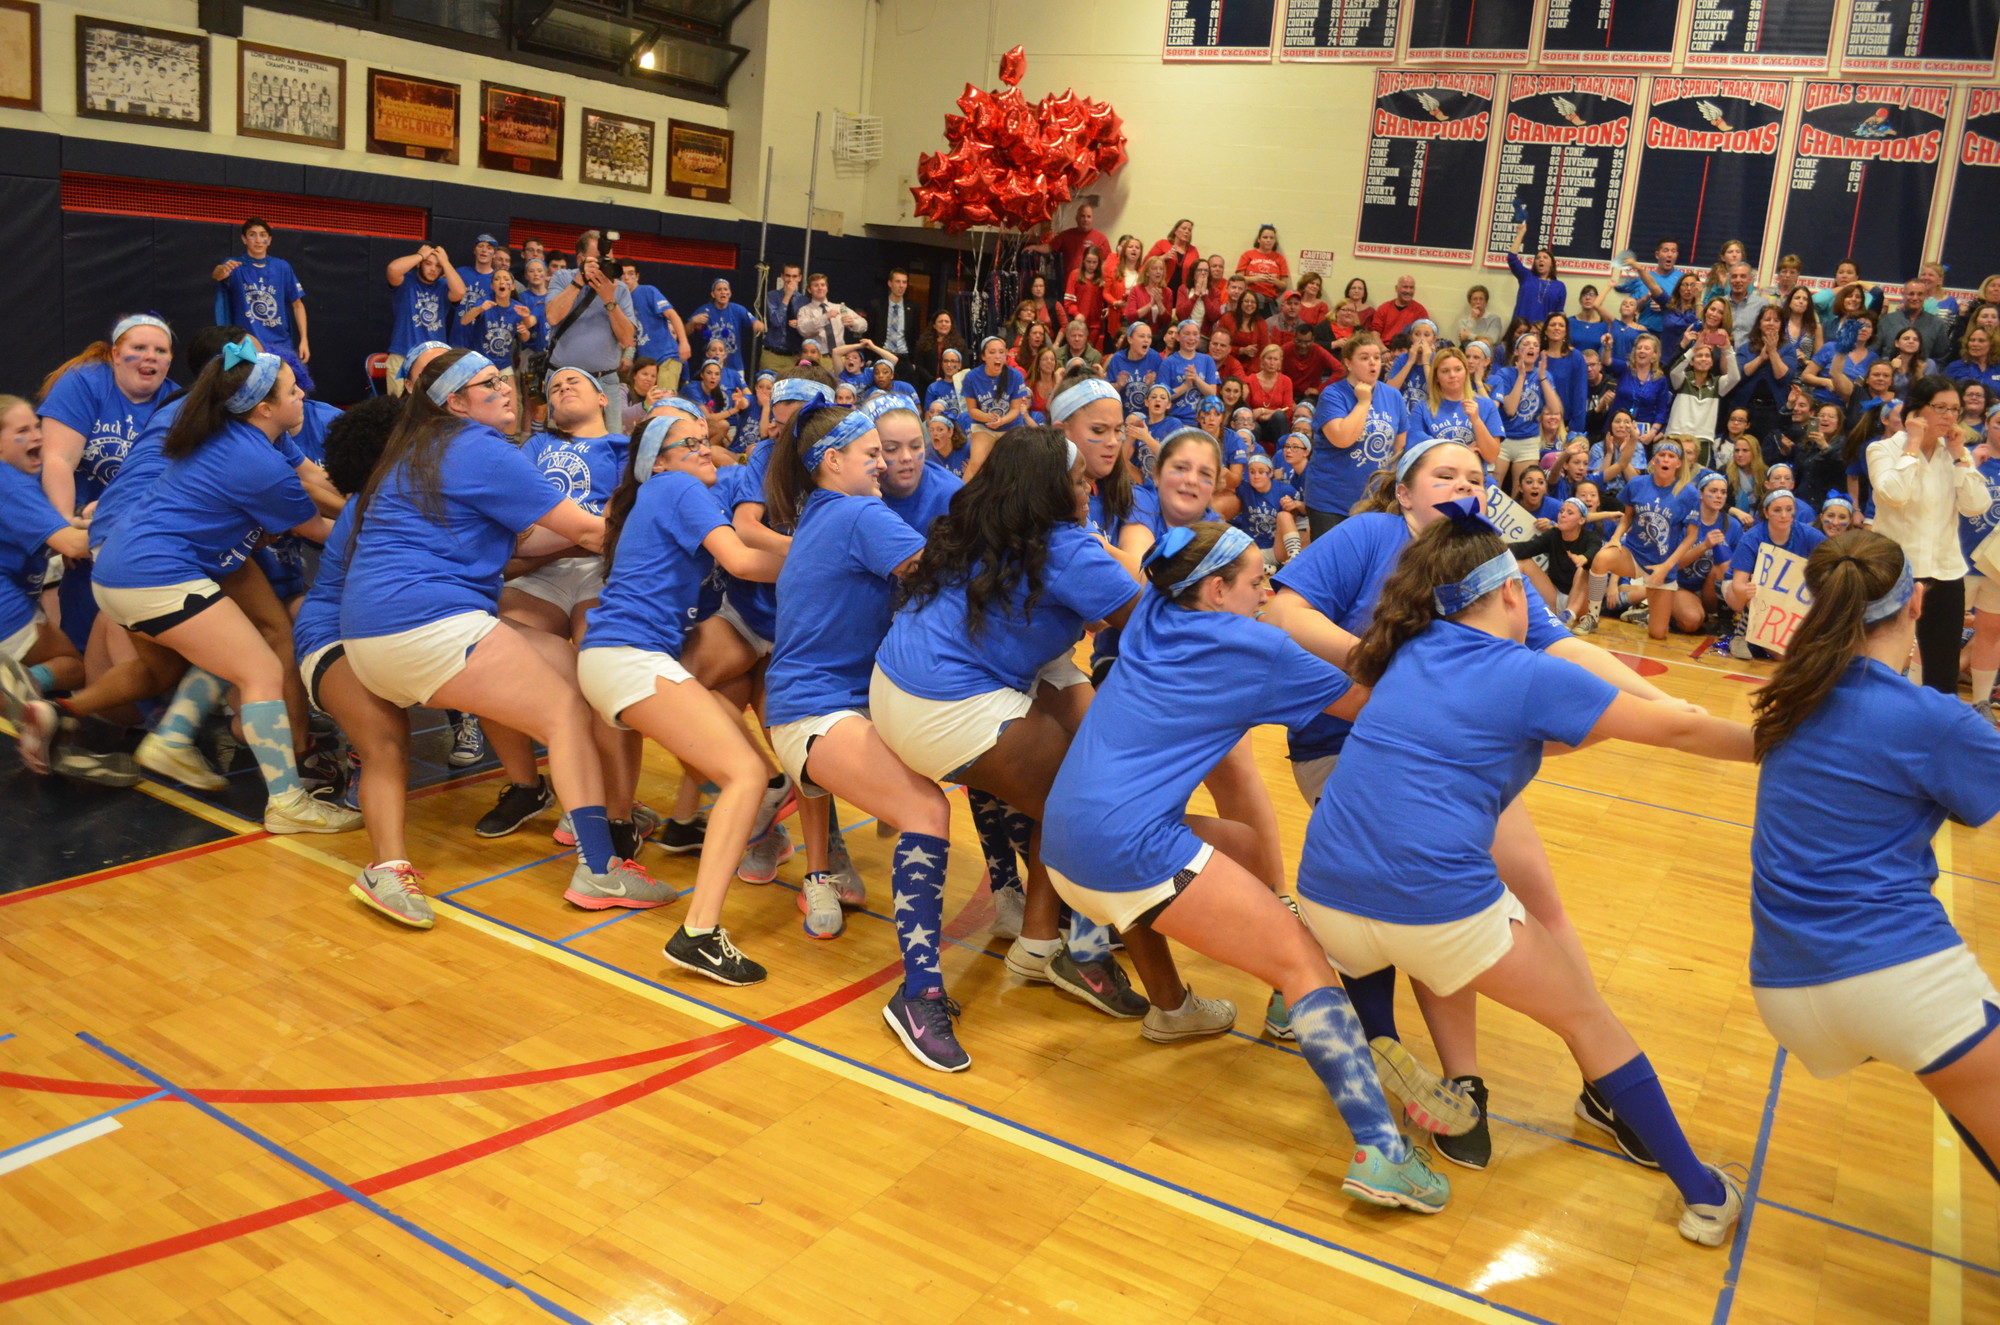 Blue continued a streak of Saturday night wins by beating Red at tug-of-war.